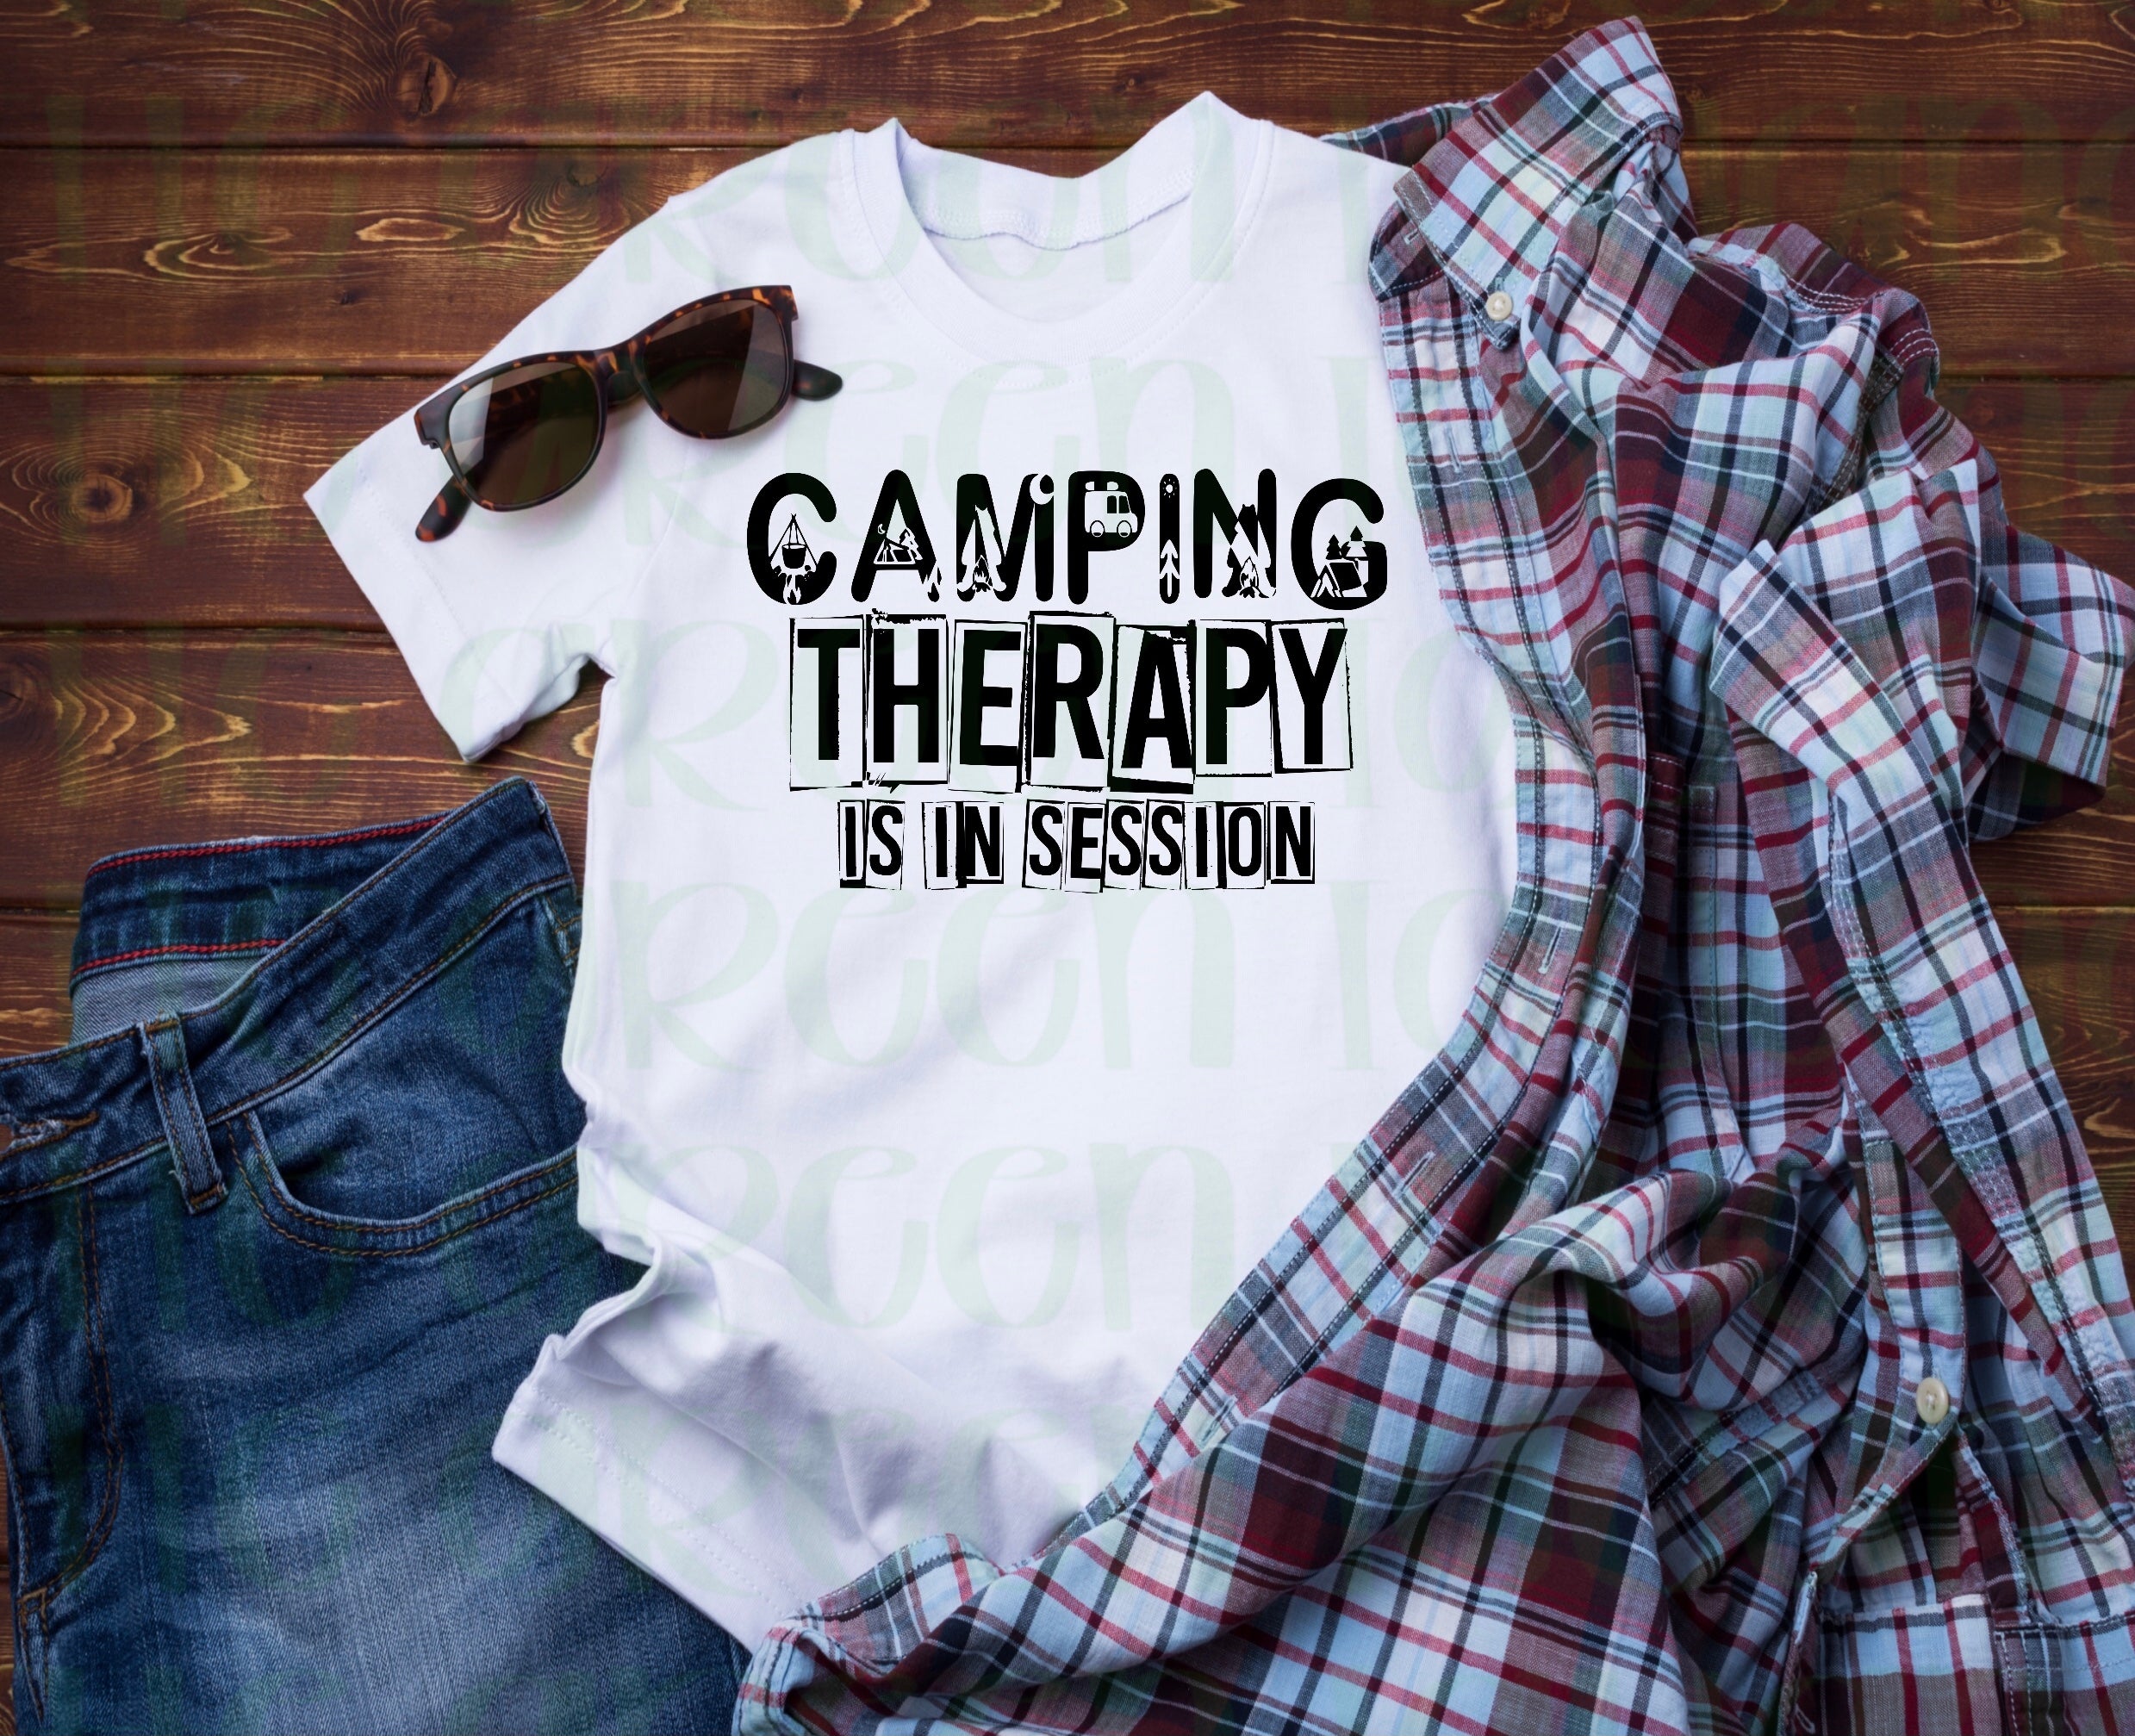 Camping therapy is in session - DIGITAL